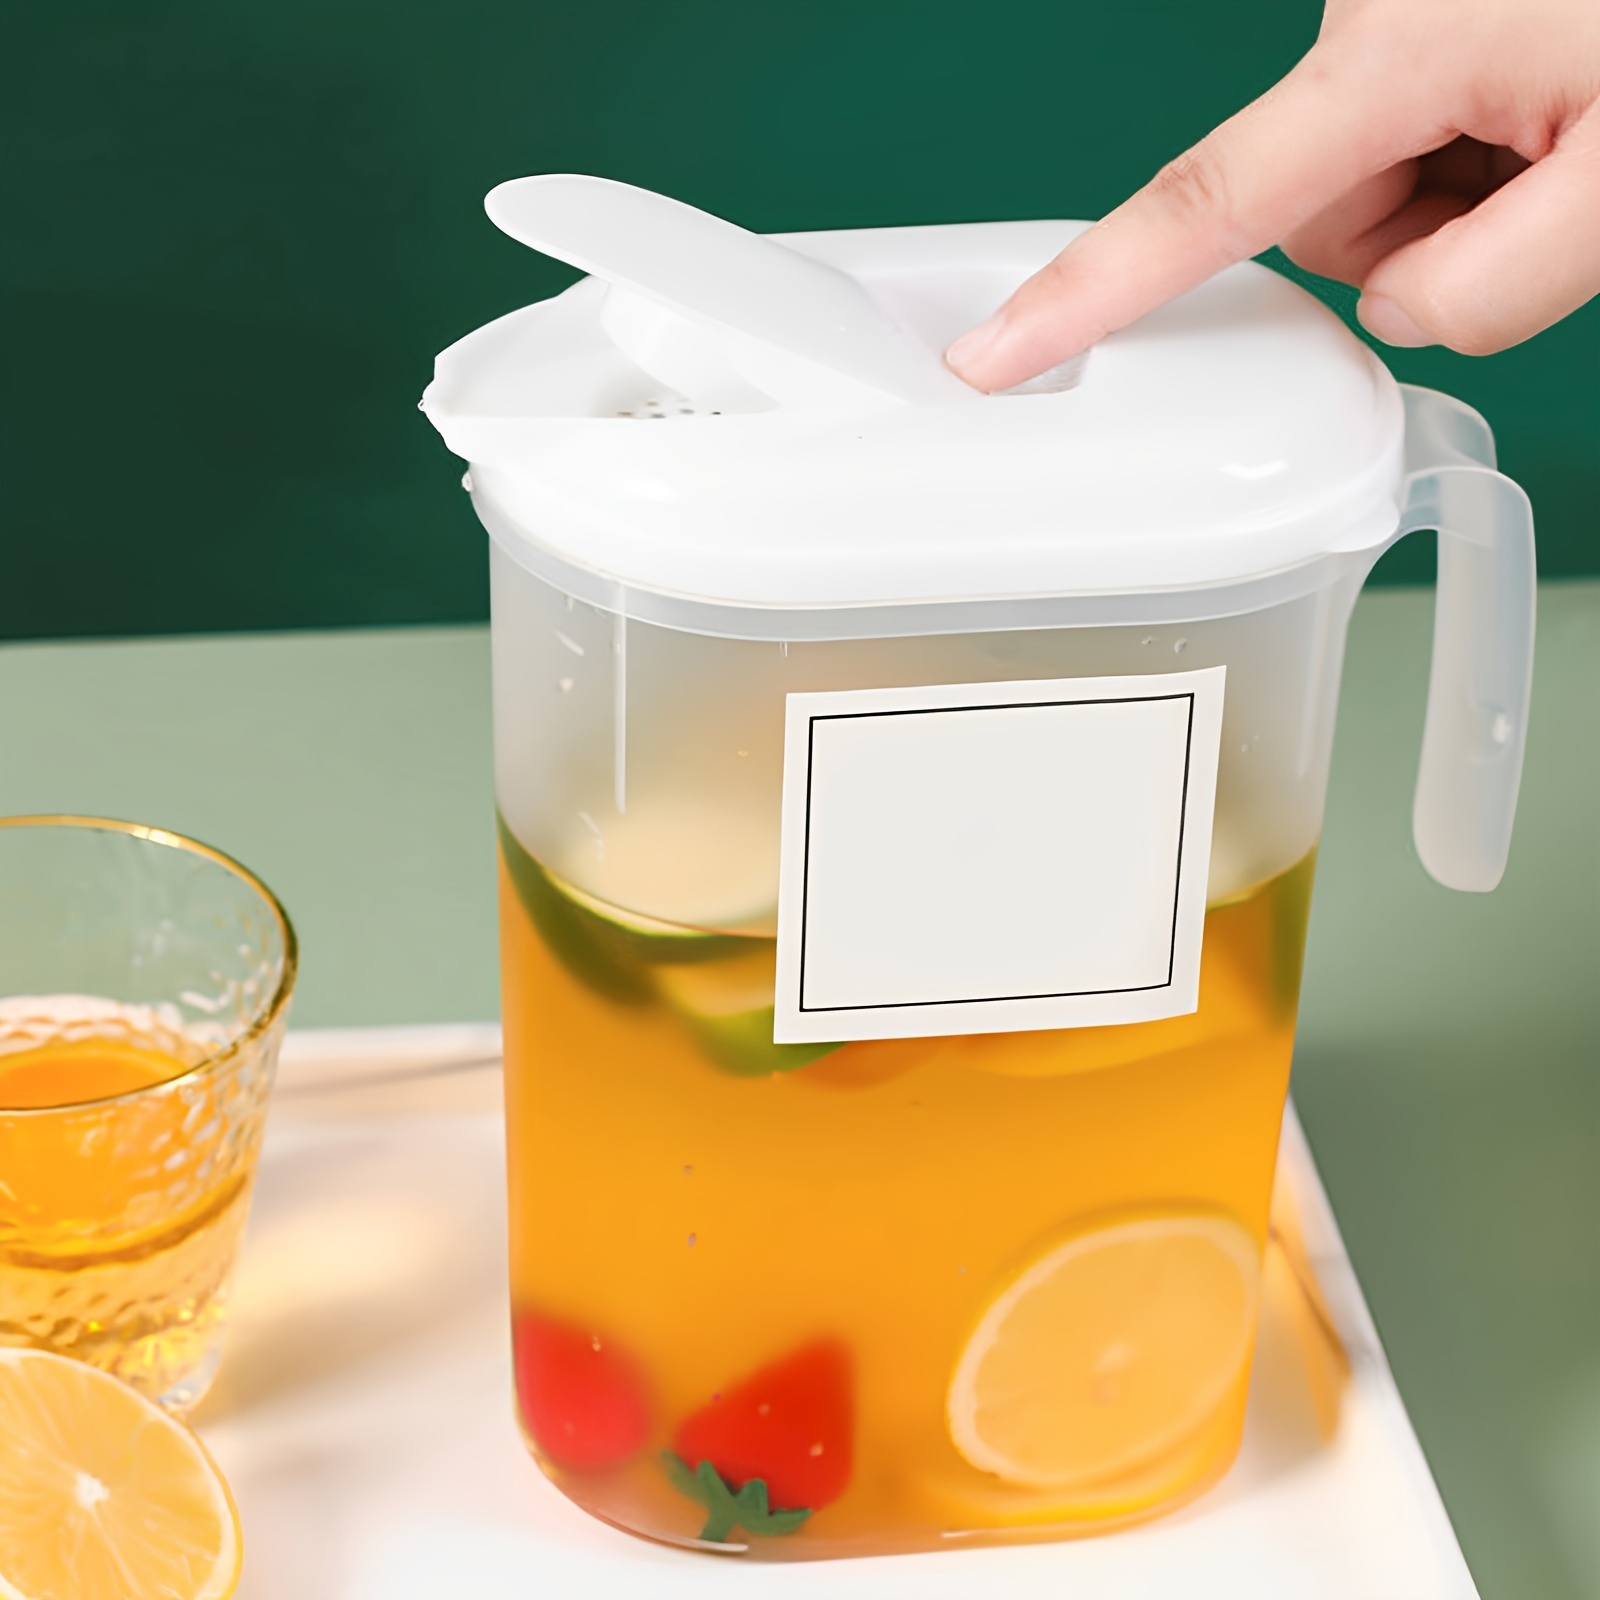 Water Pitcher, Tea Pitcher with Lid, Drink Container, Pitchers Beverage  Pitchers, Juice Containers With Lids For Fridge, Plastic Pitchers, Ice Tea